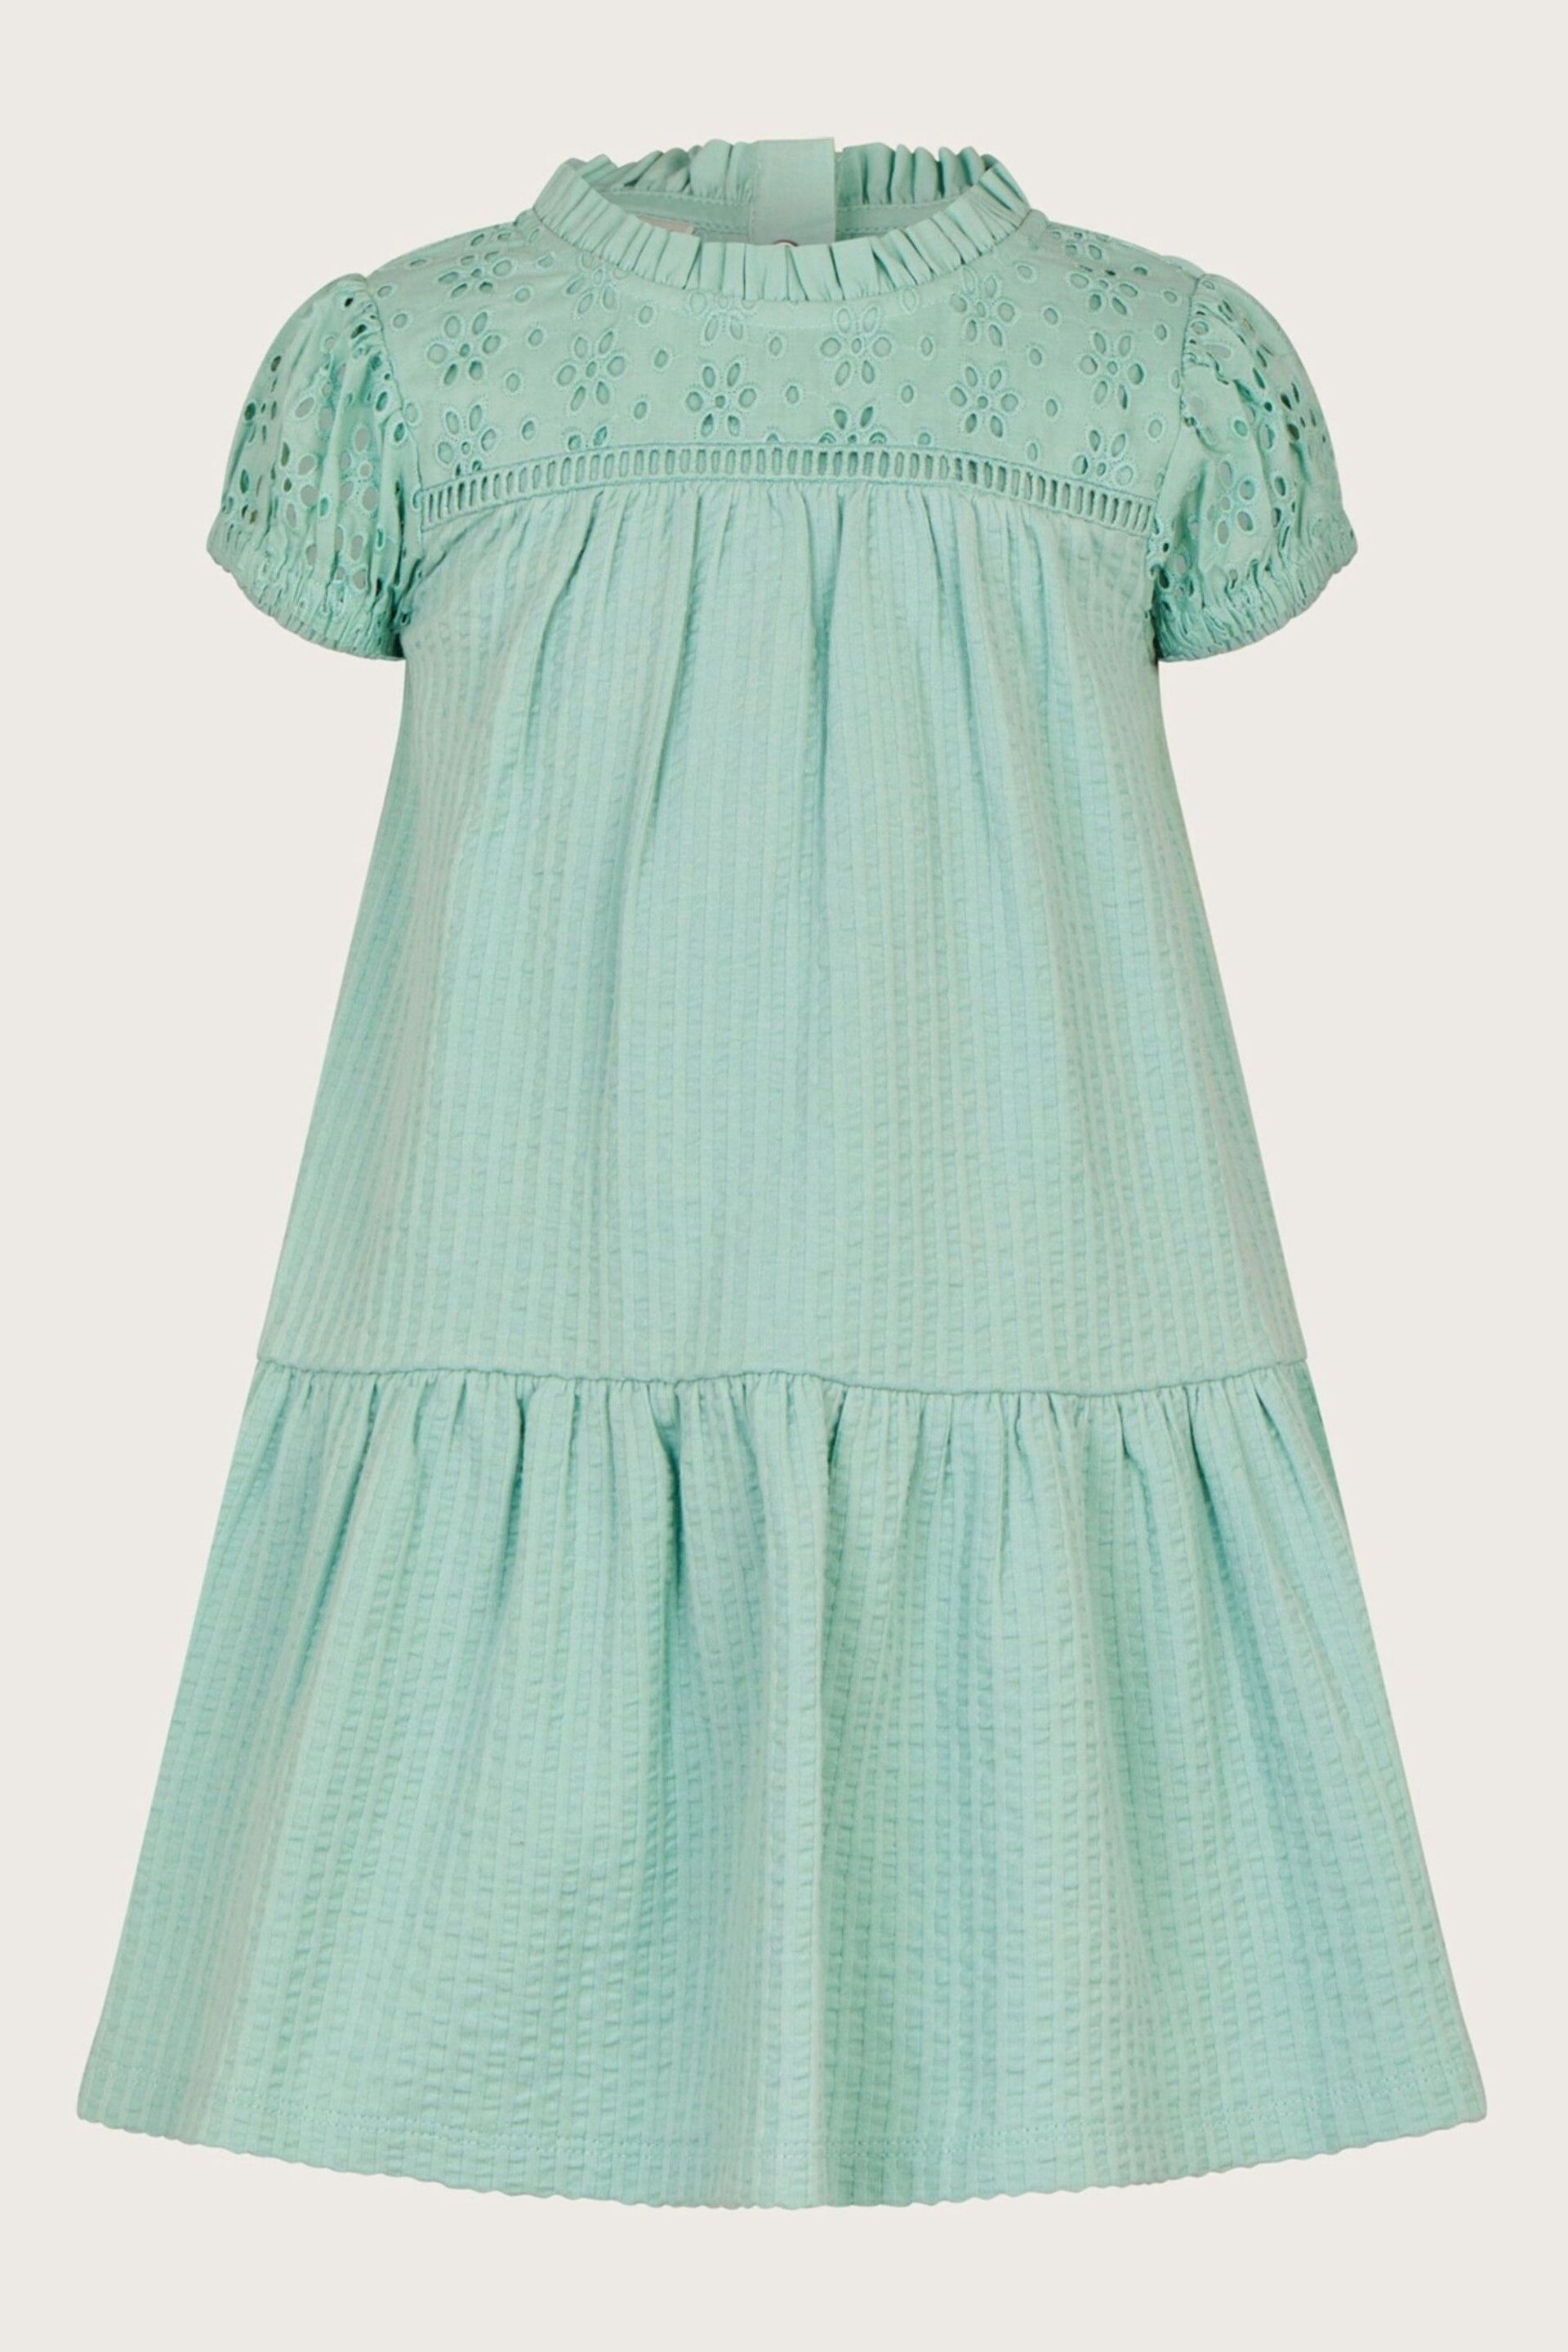 Monsoon Blue Baby Broderie Dress - Image 1 of 3